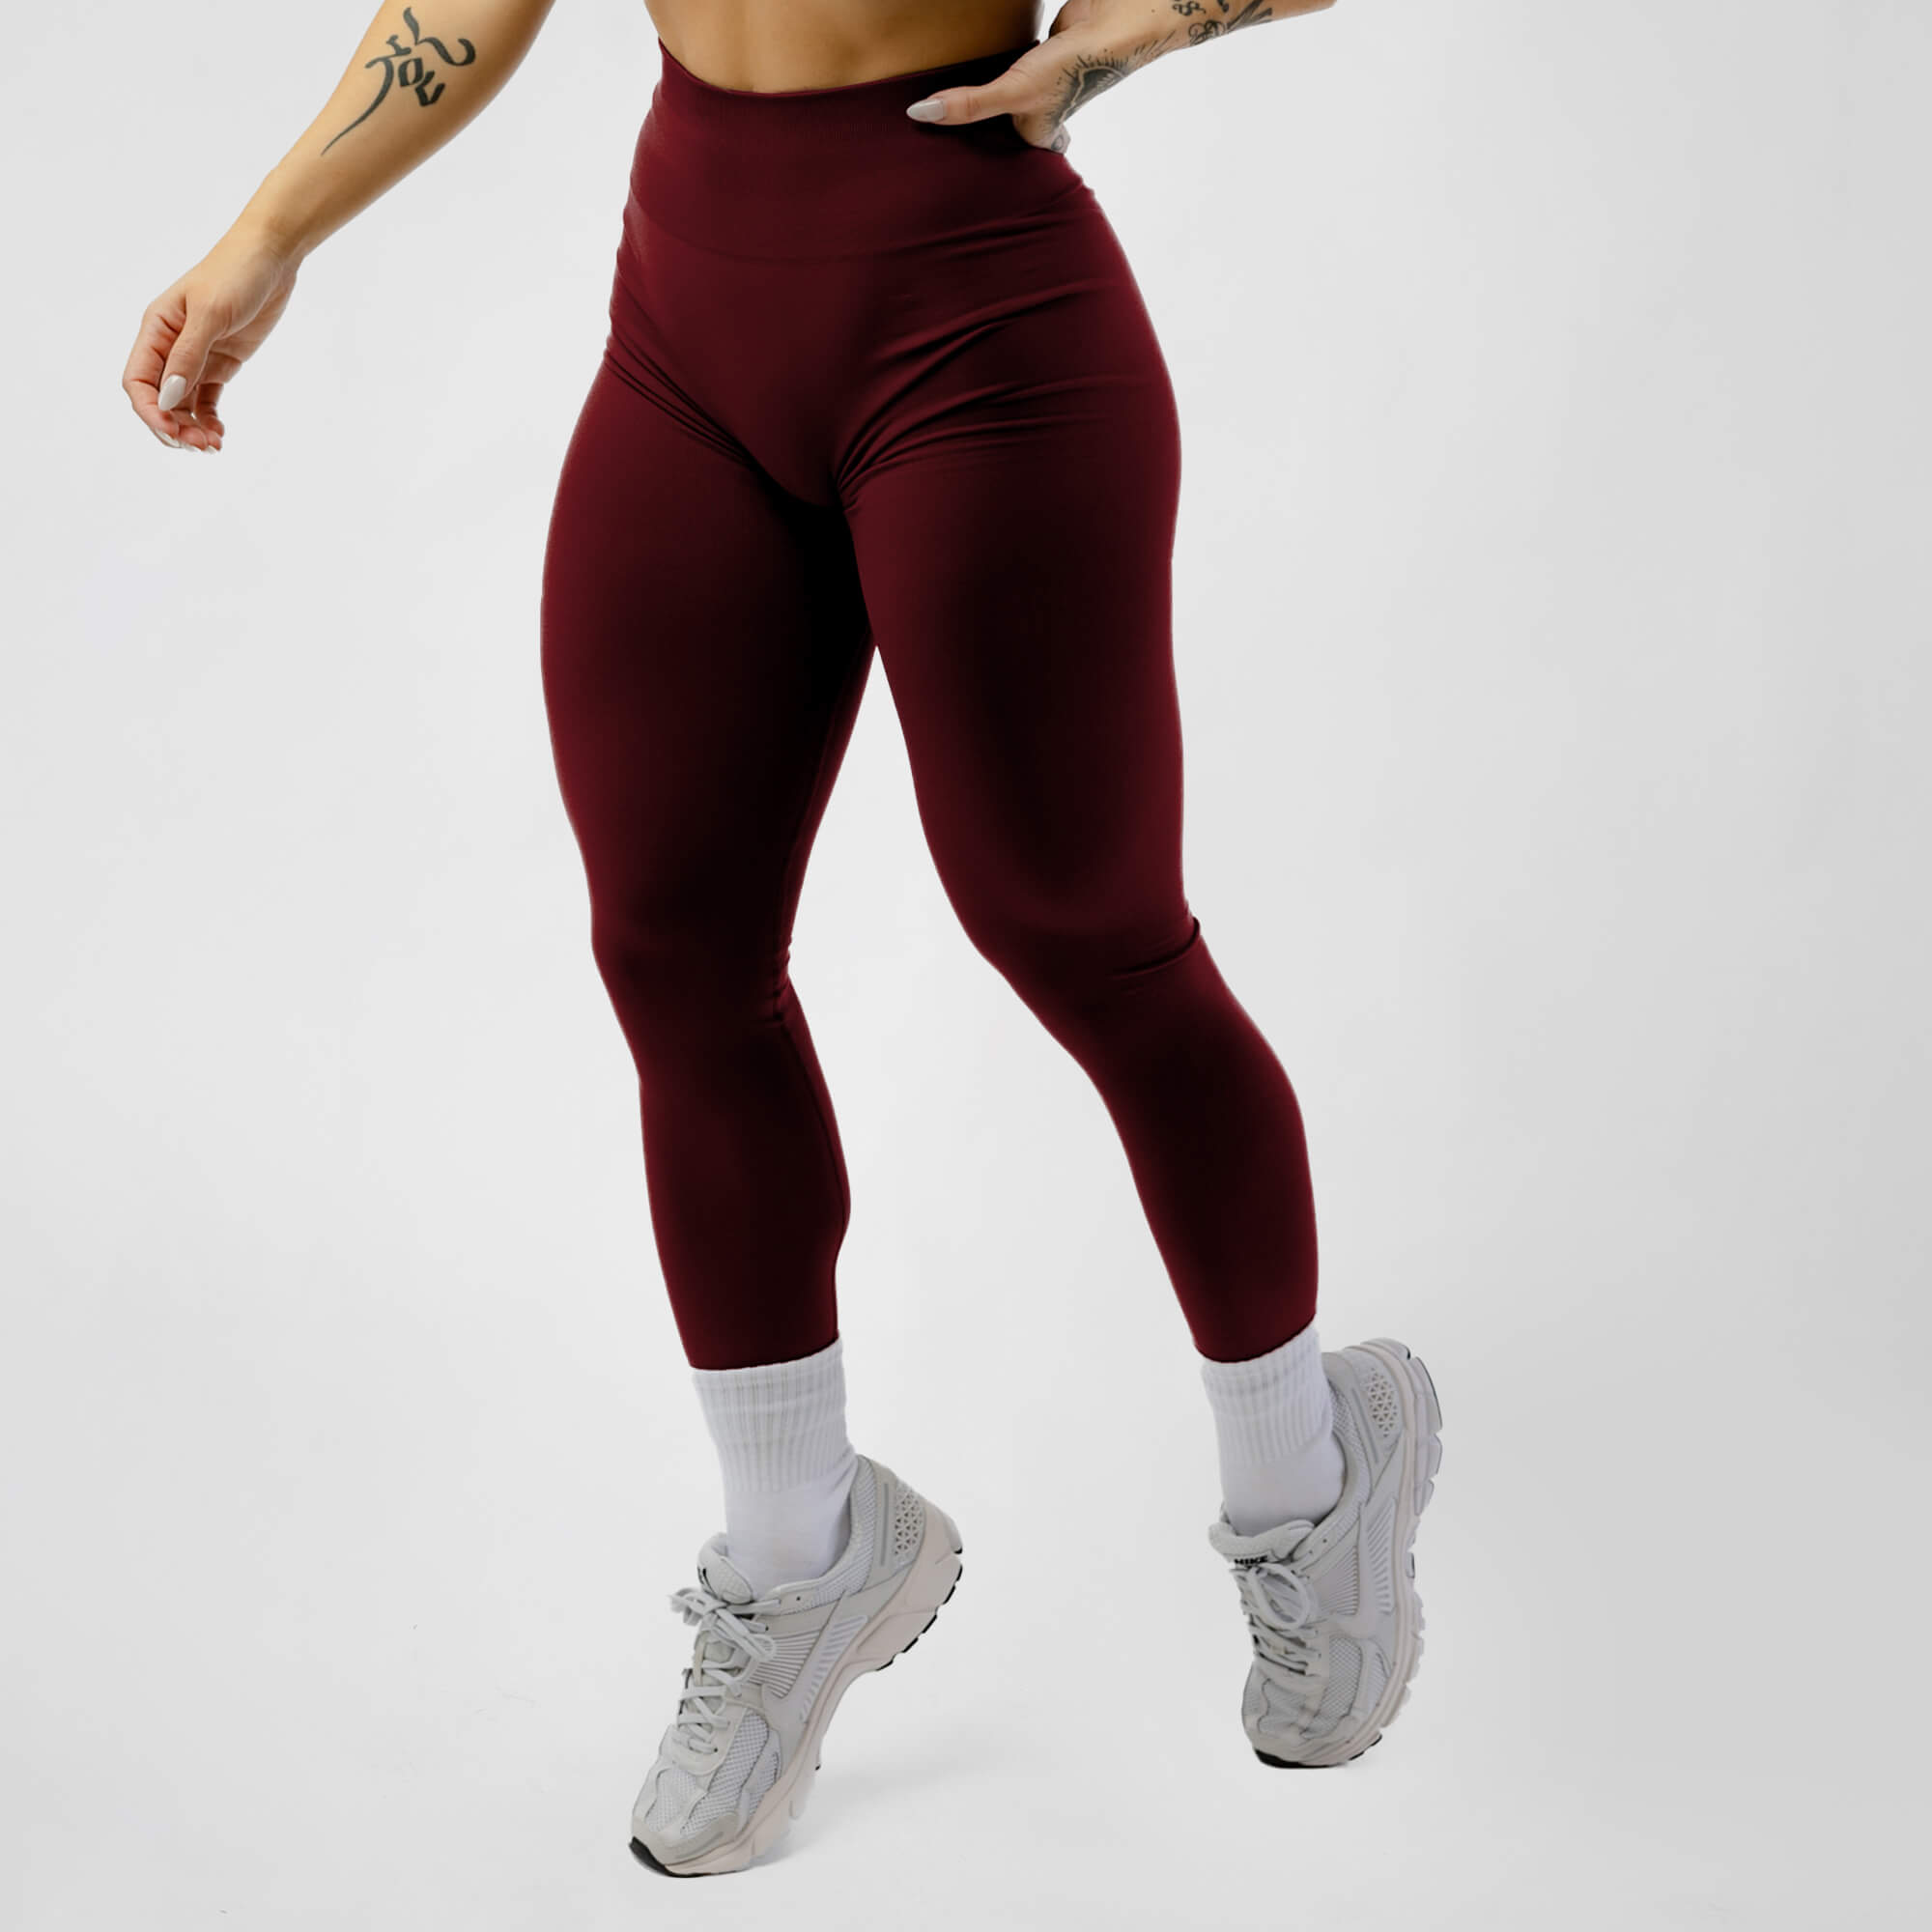 Rowing - 8+, red & black colors, dark background Leggings for Sale by  Hawthorn Mineart